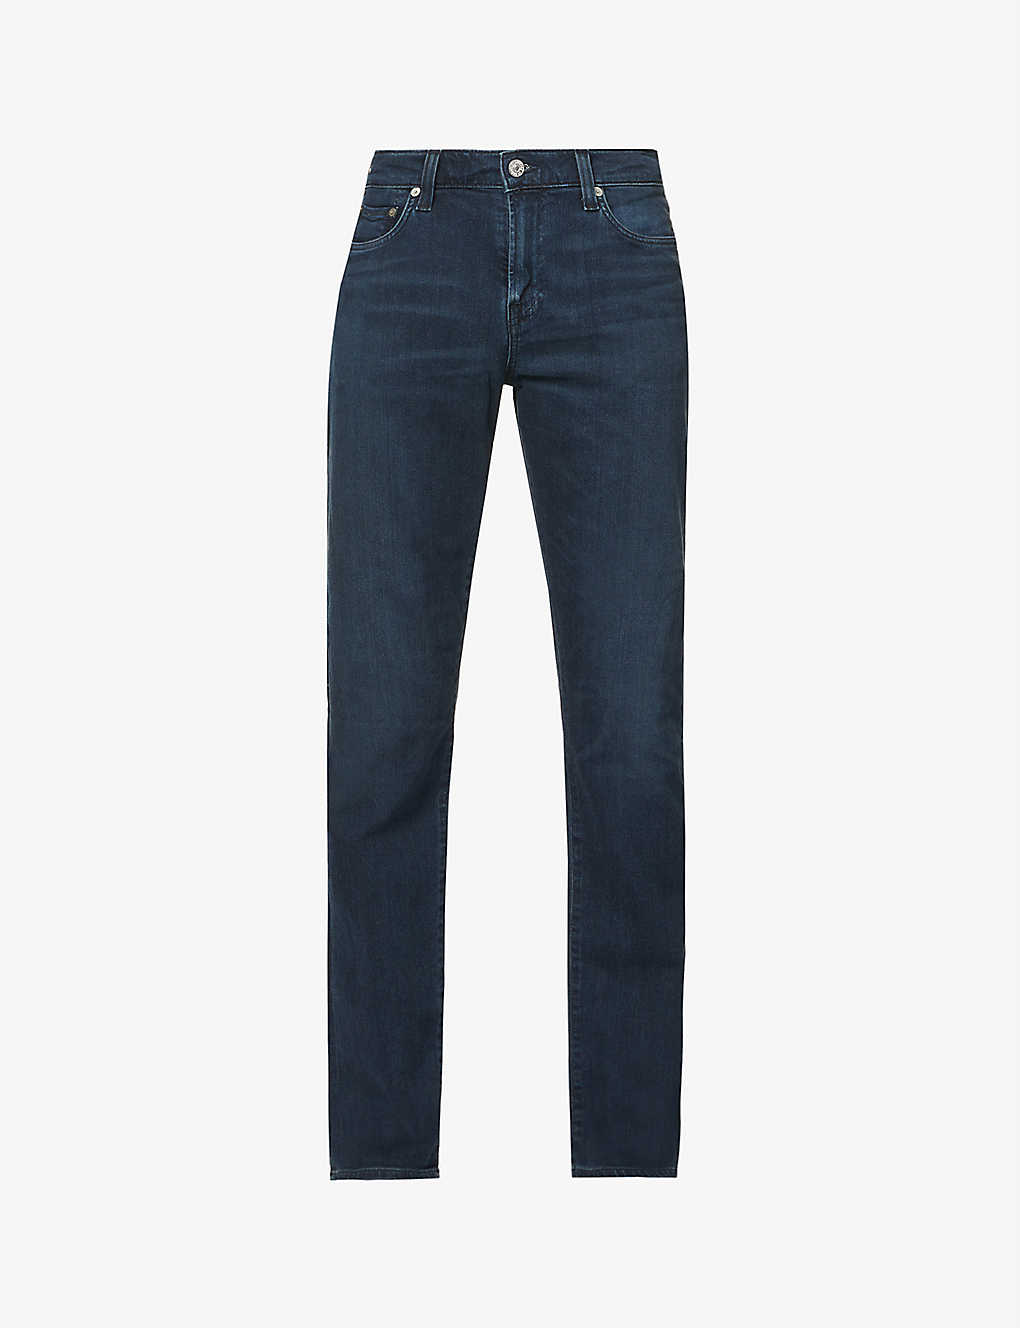 Citizens Of Humanity London Tapered Jeans In Blue